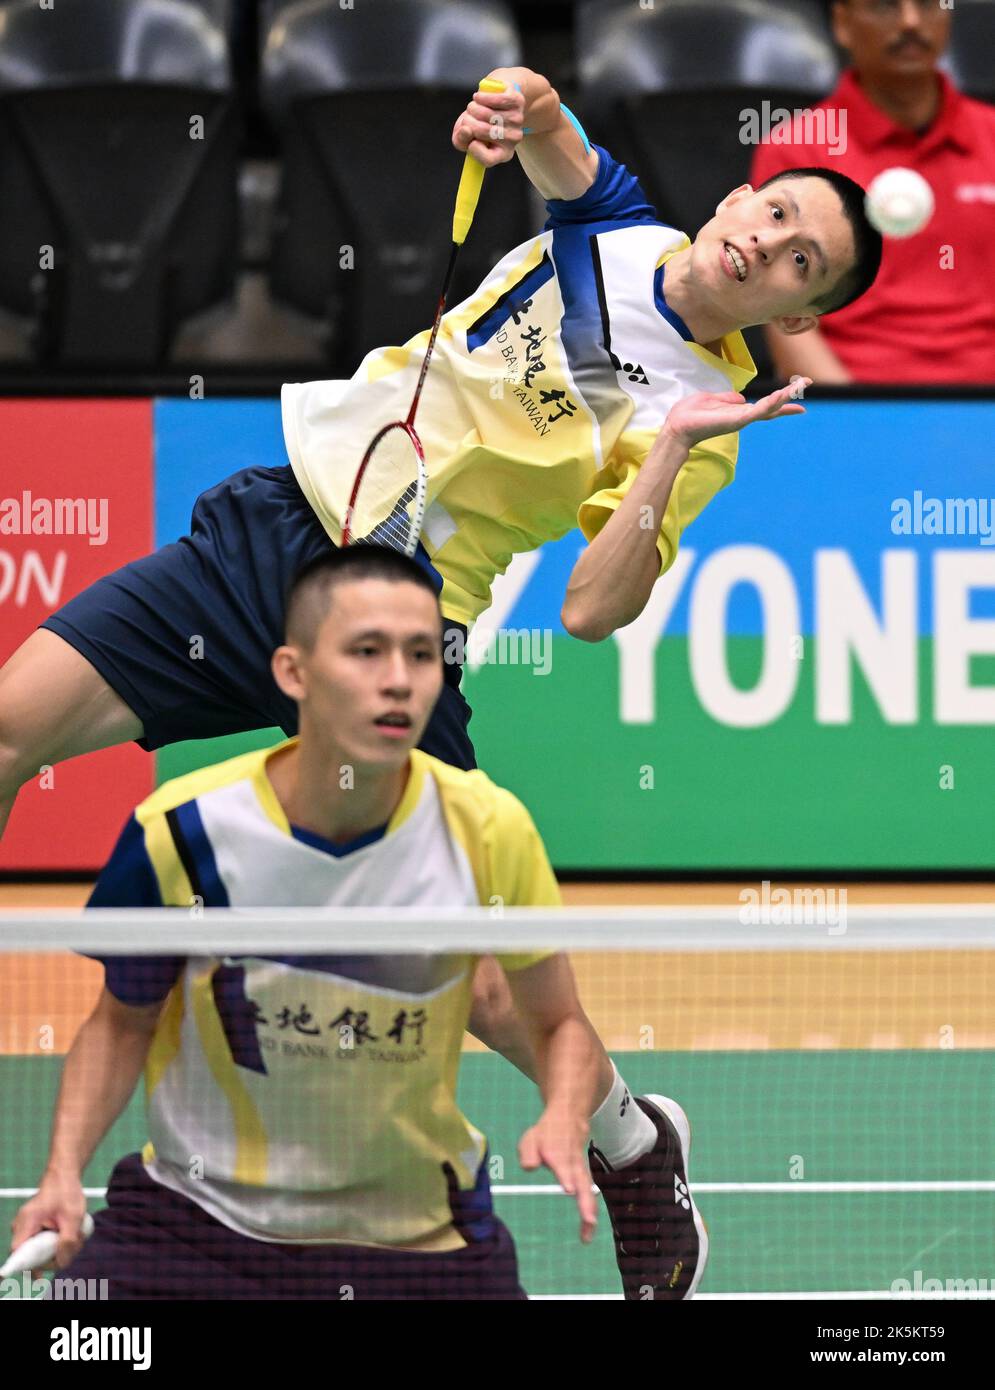 Sydney, Australia. 09th Oct, 2022. Lee Fang-Jen (Back) and Lee Fang-Chih (front) of Chinese Taipei seen in action during the YONEX Sydney International 2022 Men's Double finals match against Nyl Yakura and adam xingyu dong (Canada). Lee Fang-Jen and Lee Fang-Chih won the match 21-12, 16-21, 21-16. Credit: SOPA Images Limited/Alamy Live News Stock Photo